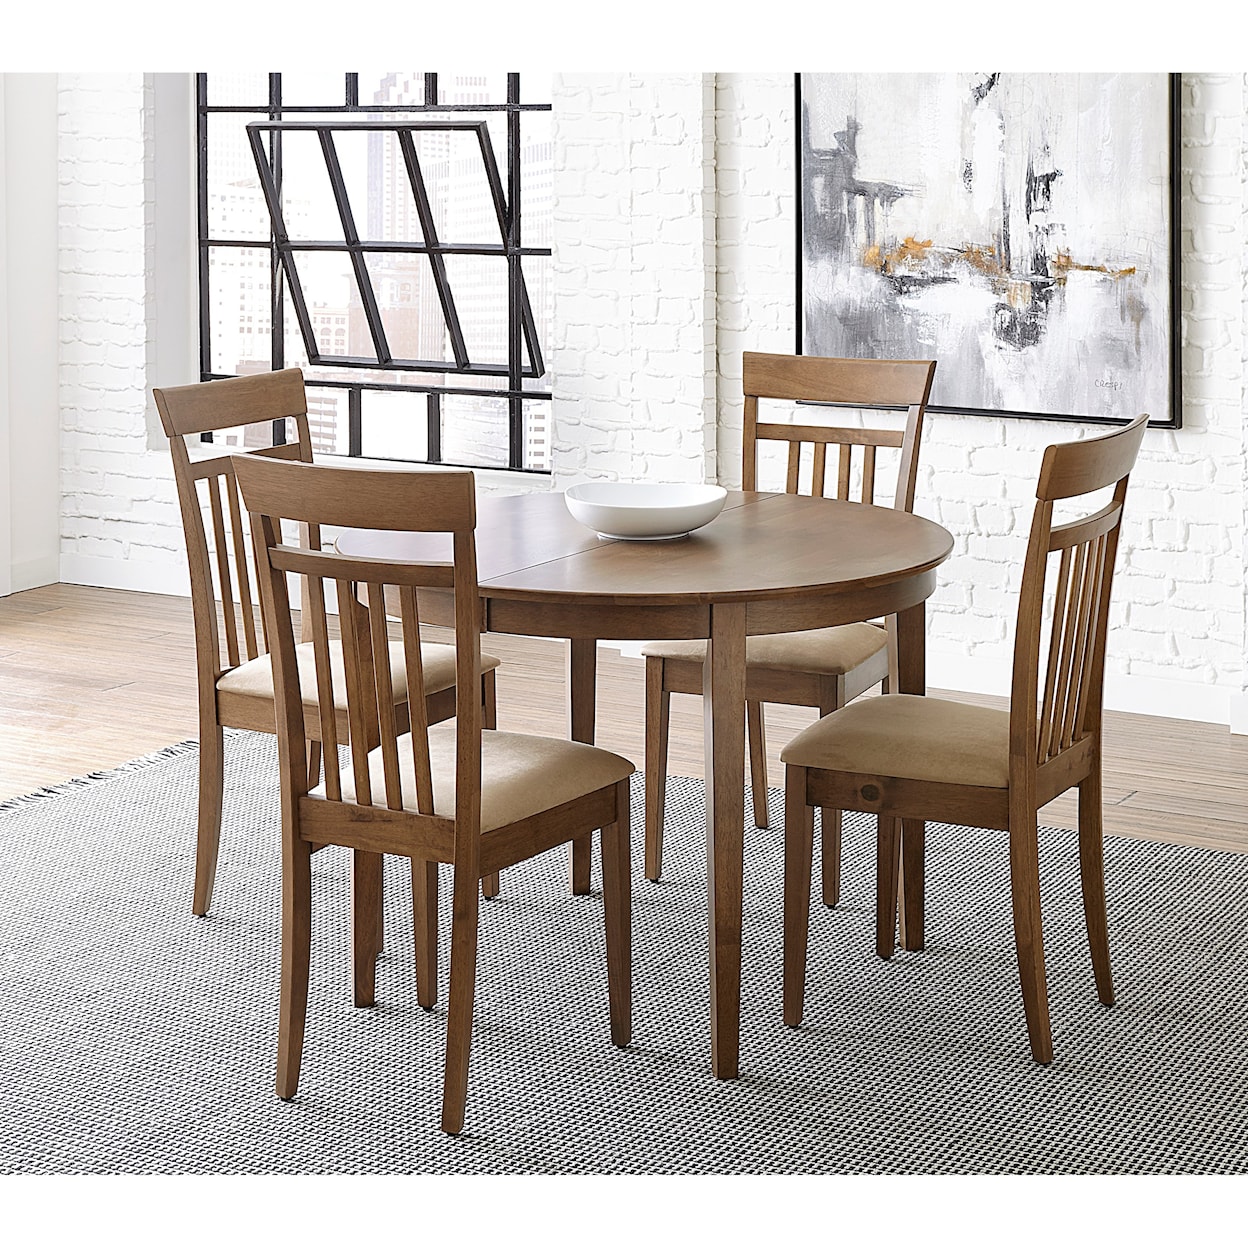 Carolina Chairs Palmer 5-Piece Table and Chair Set